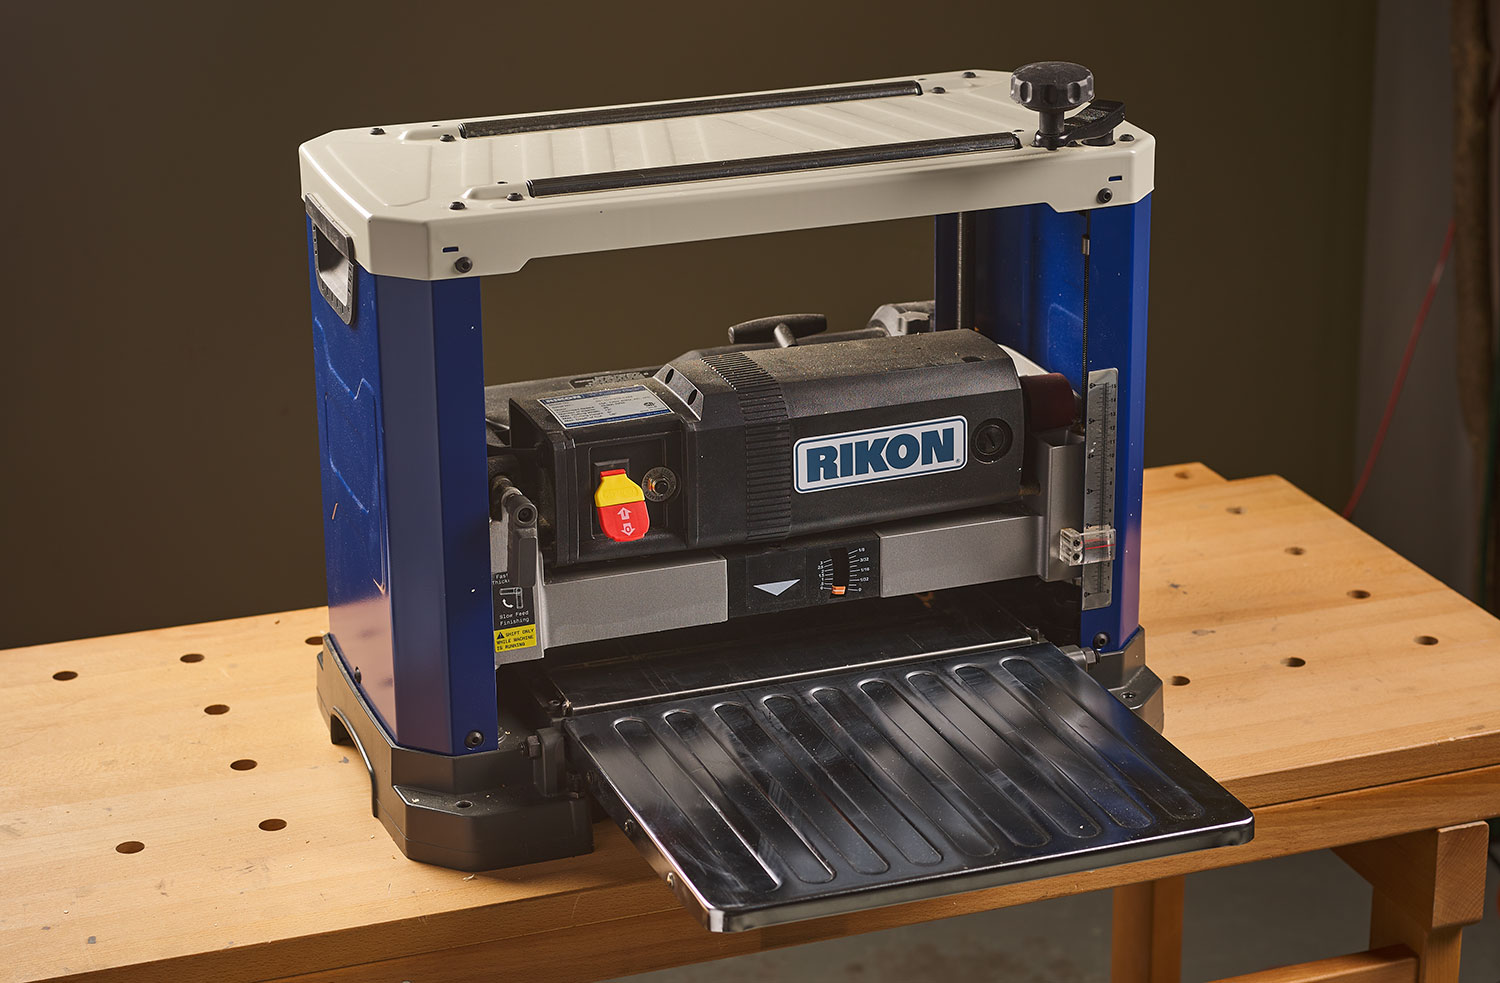 A Rikon helical planer on top of a workbench.